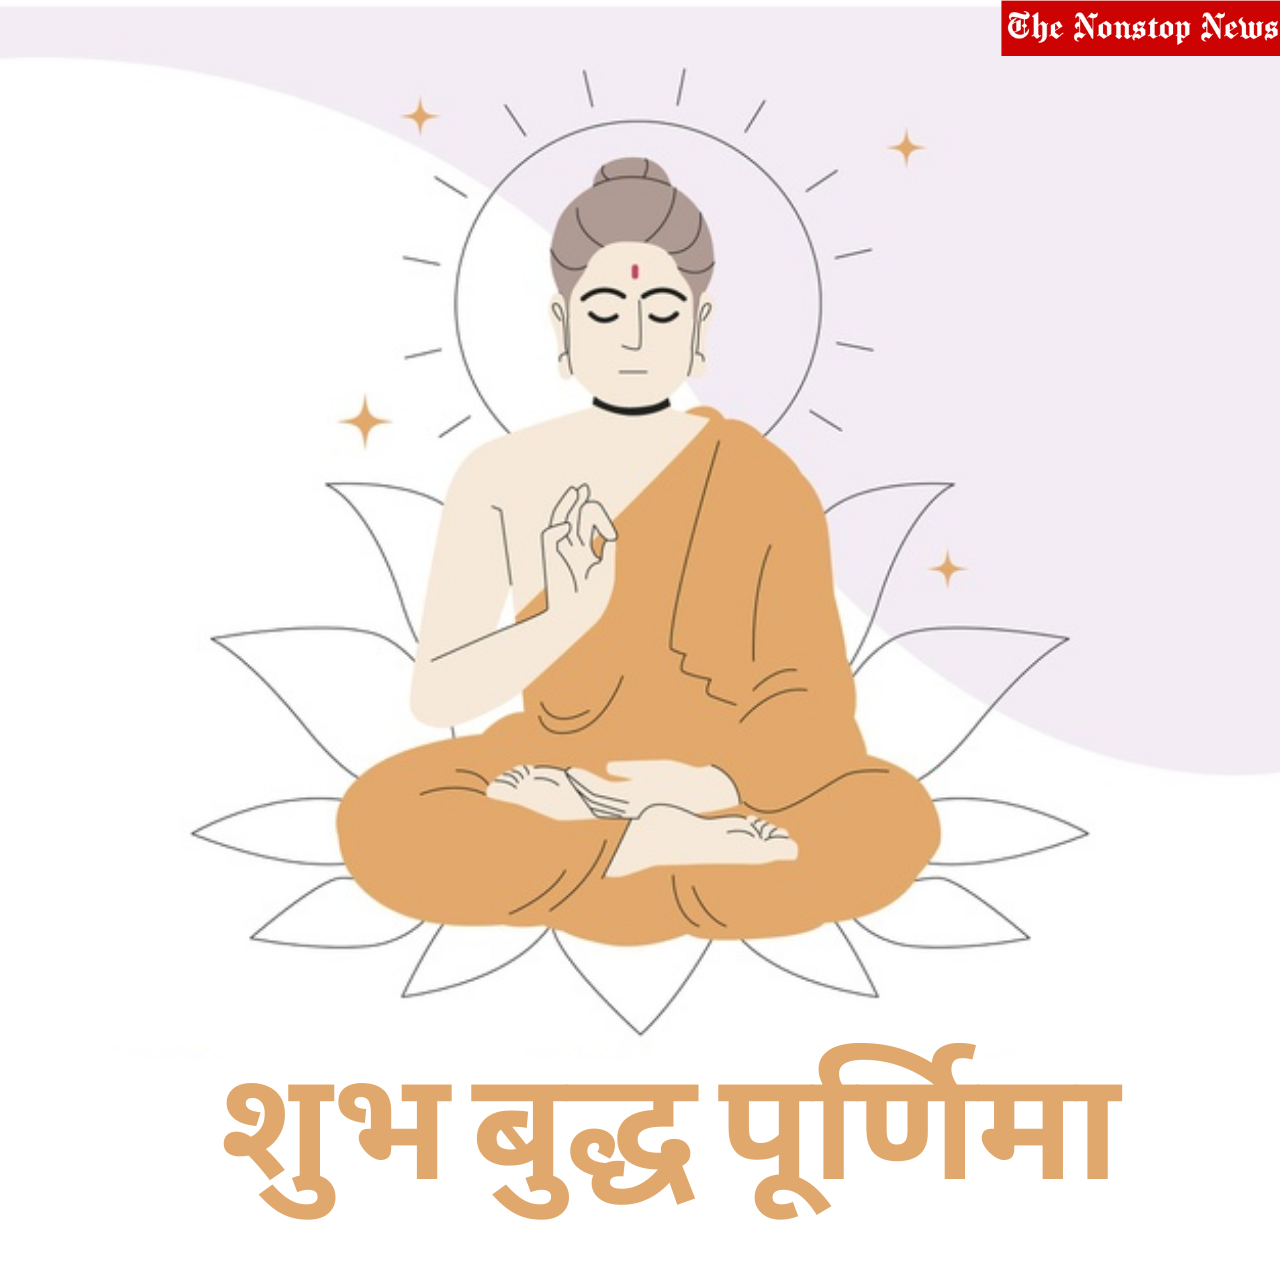 Buddha Purnima 2021: Nepali and Gujarati Wishes, HD Images, Greetings, Quotes, Status, and WhatsApp Messages to Share